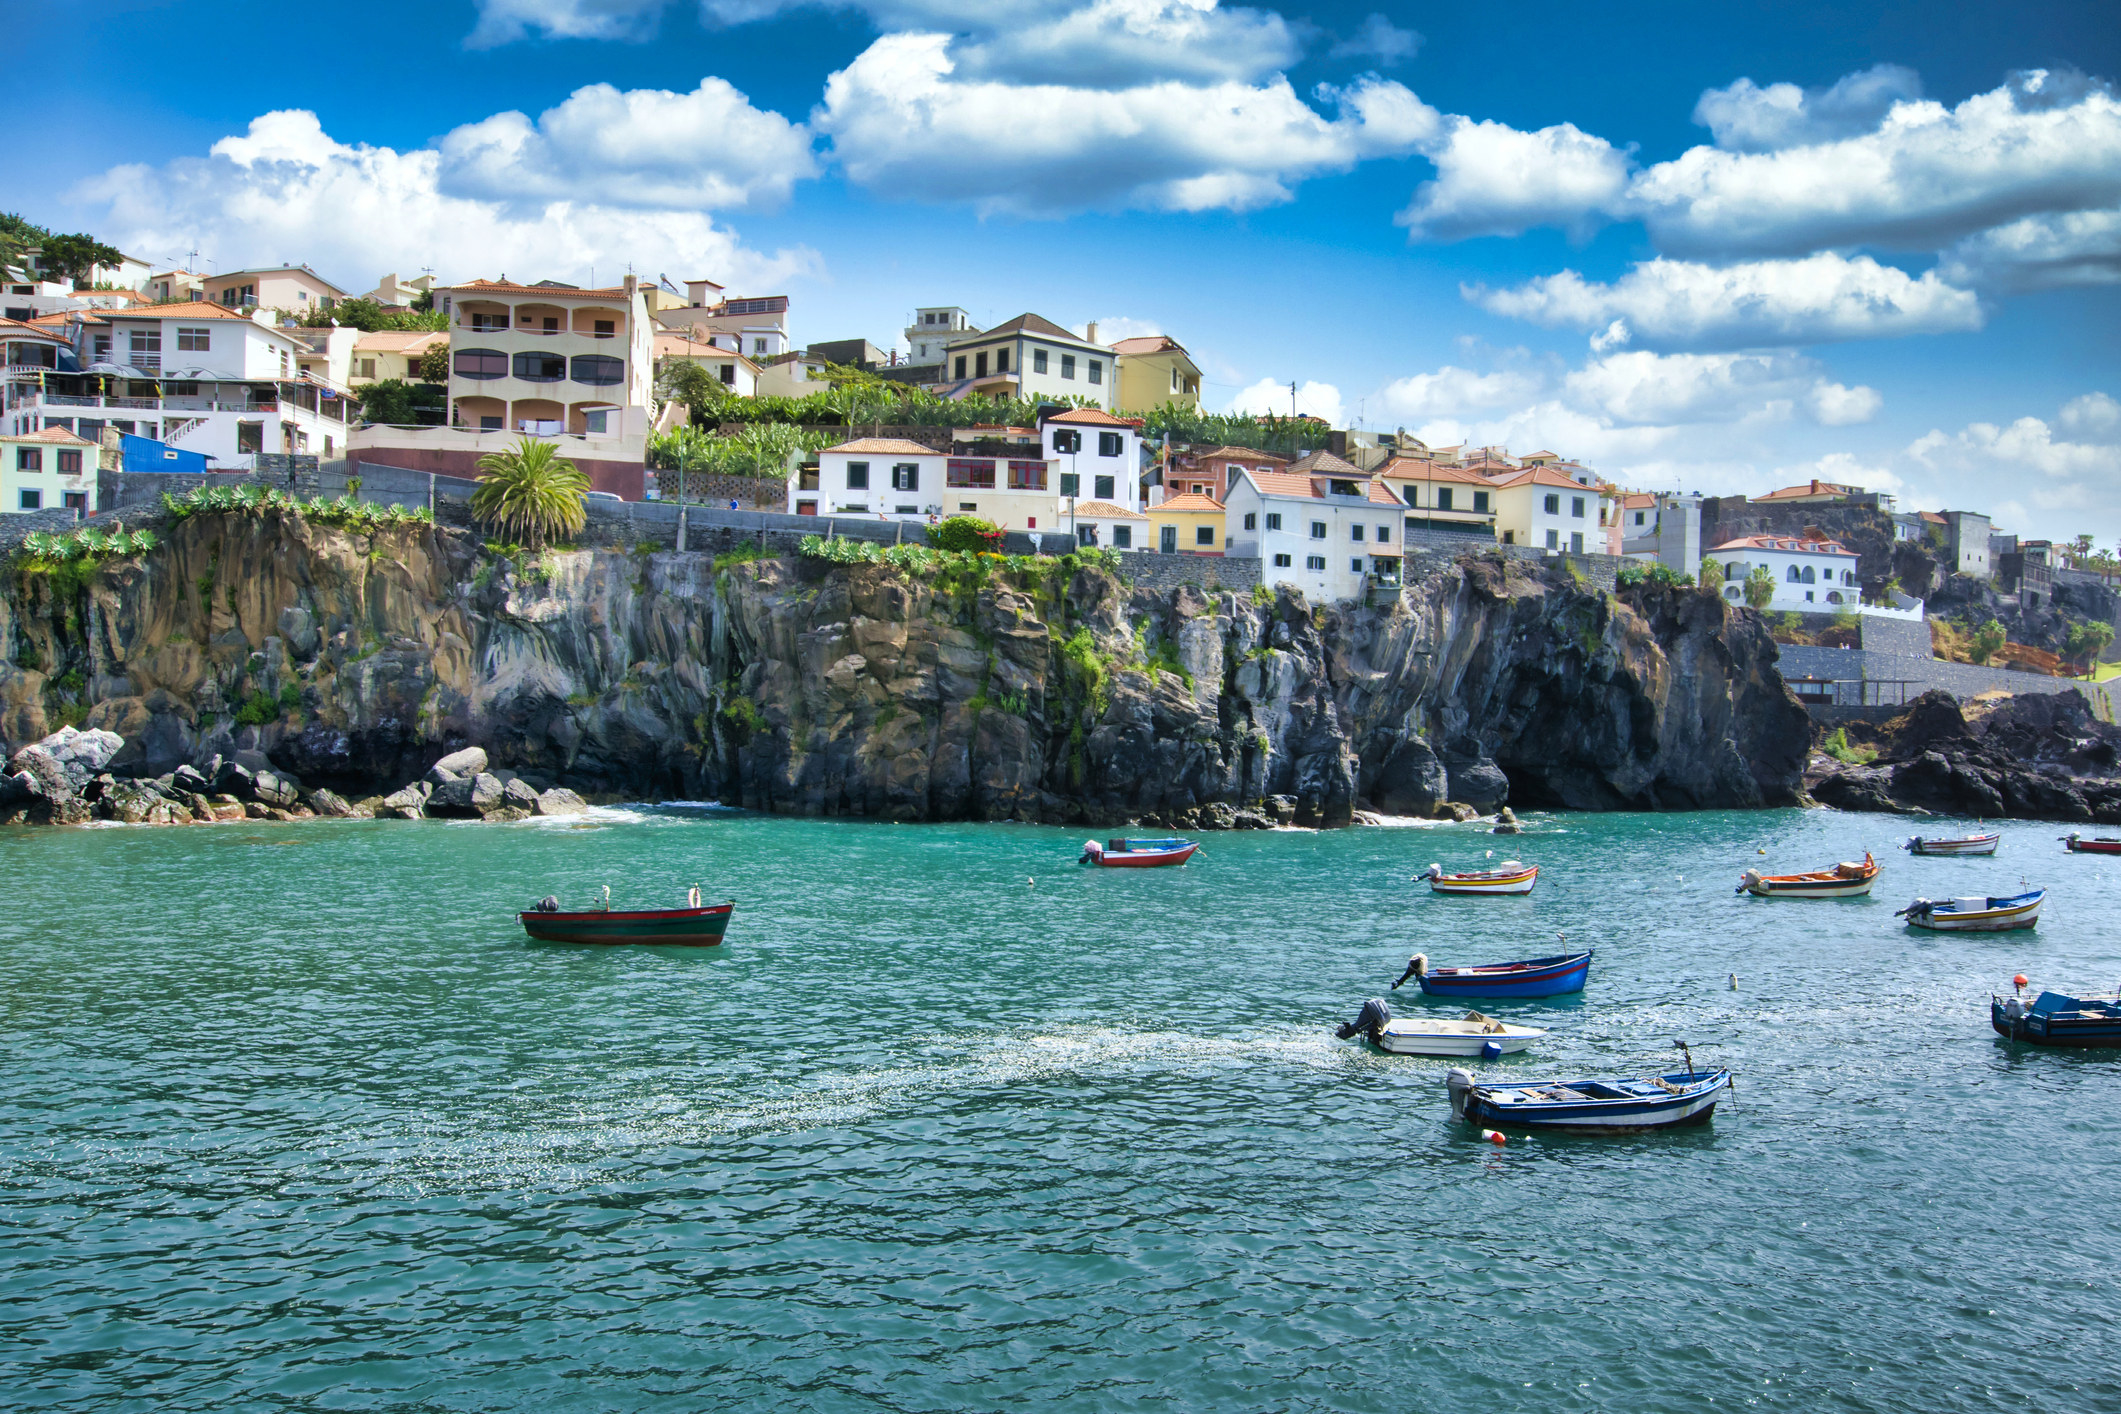 A fishing village in Madeira.